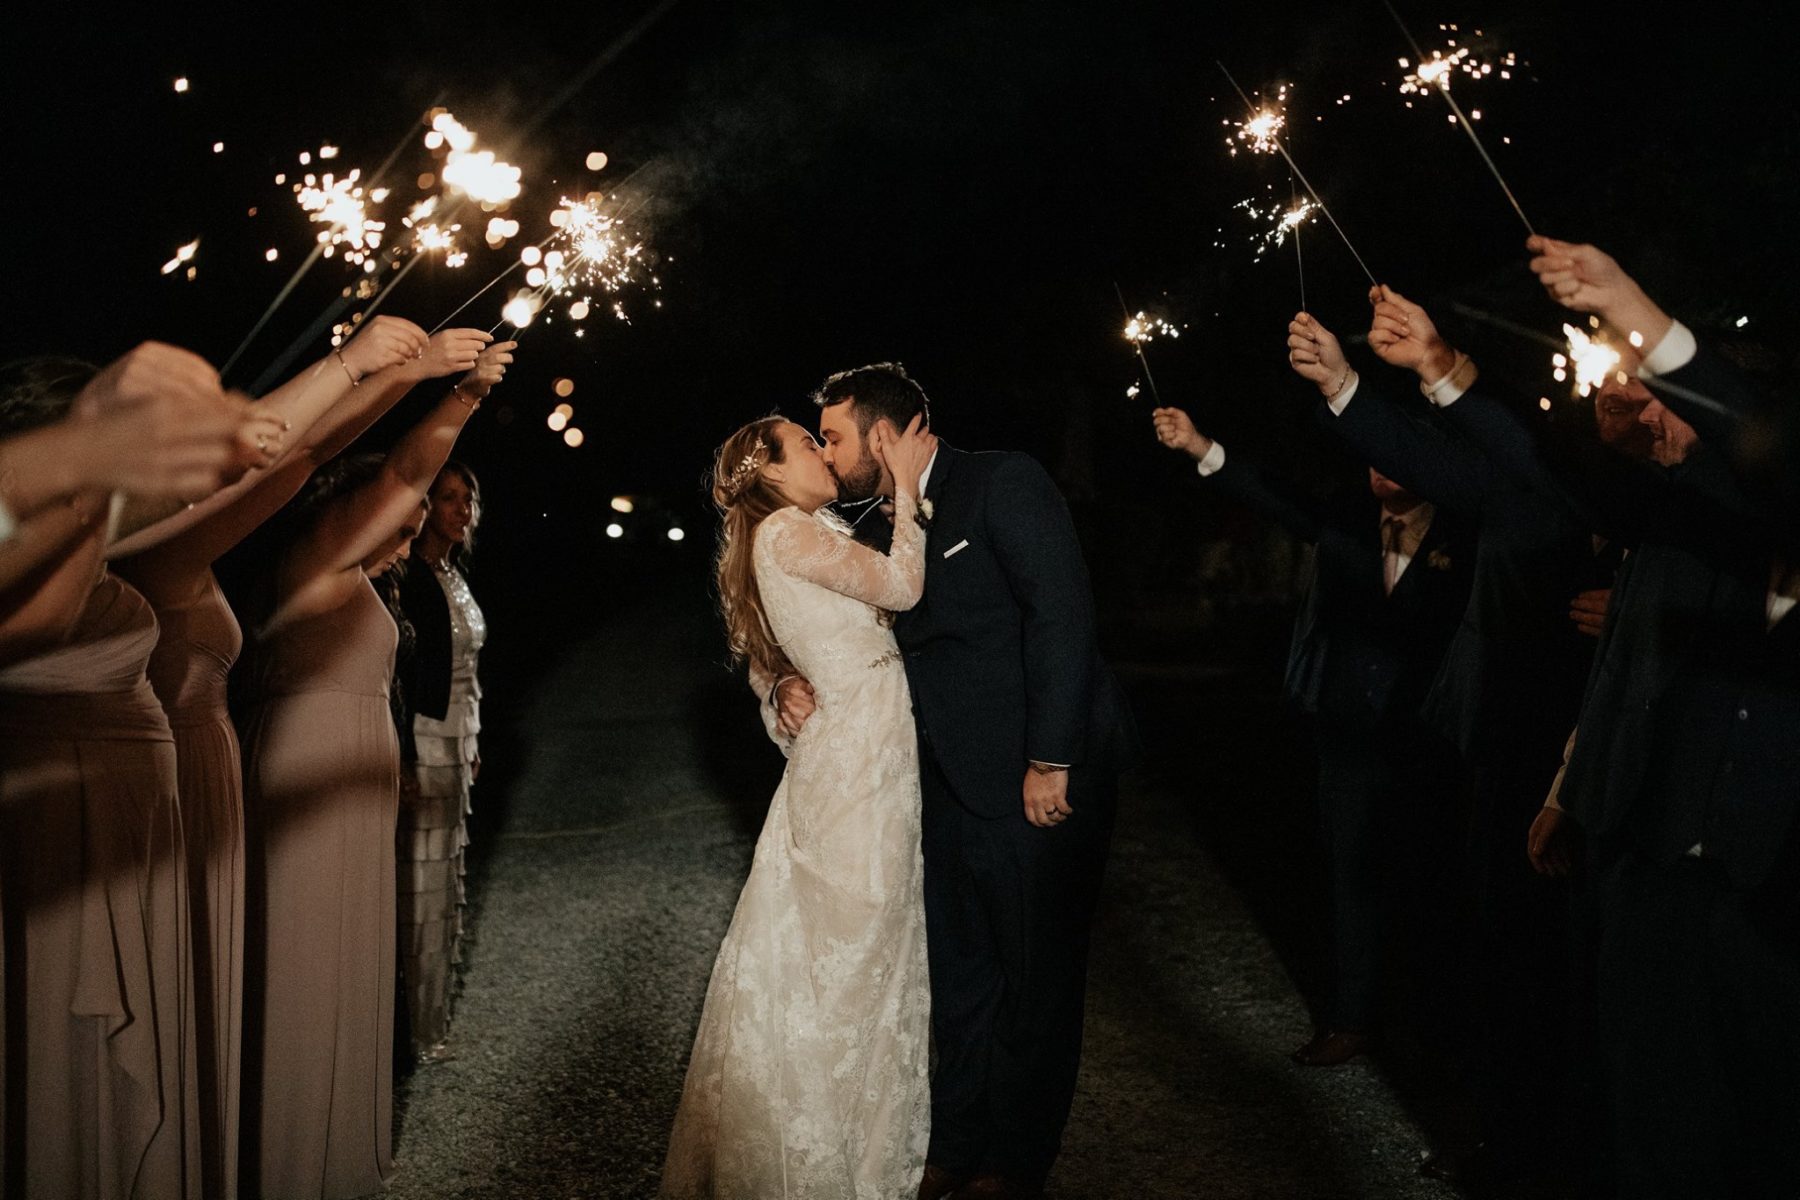 Wedding Sparkler Exit: Simply Rustic Front Porch Farms wedding featured on Nashville Bride Guide